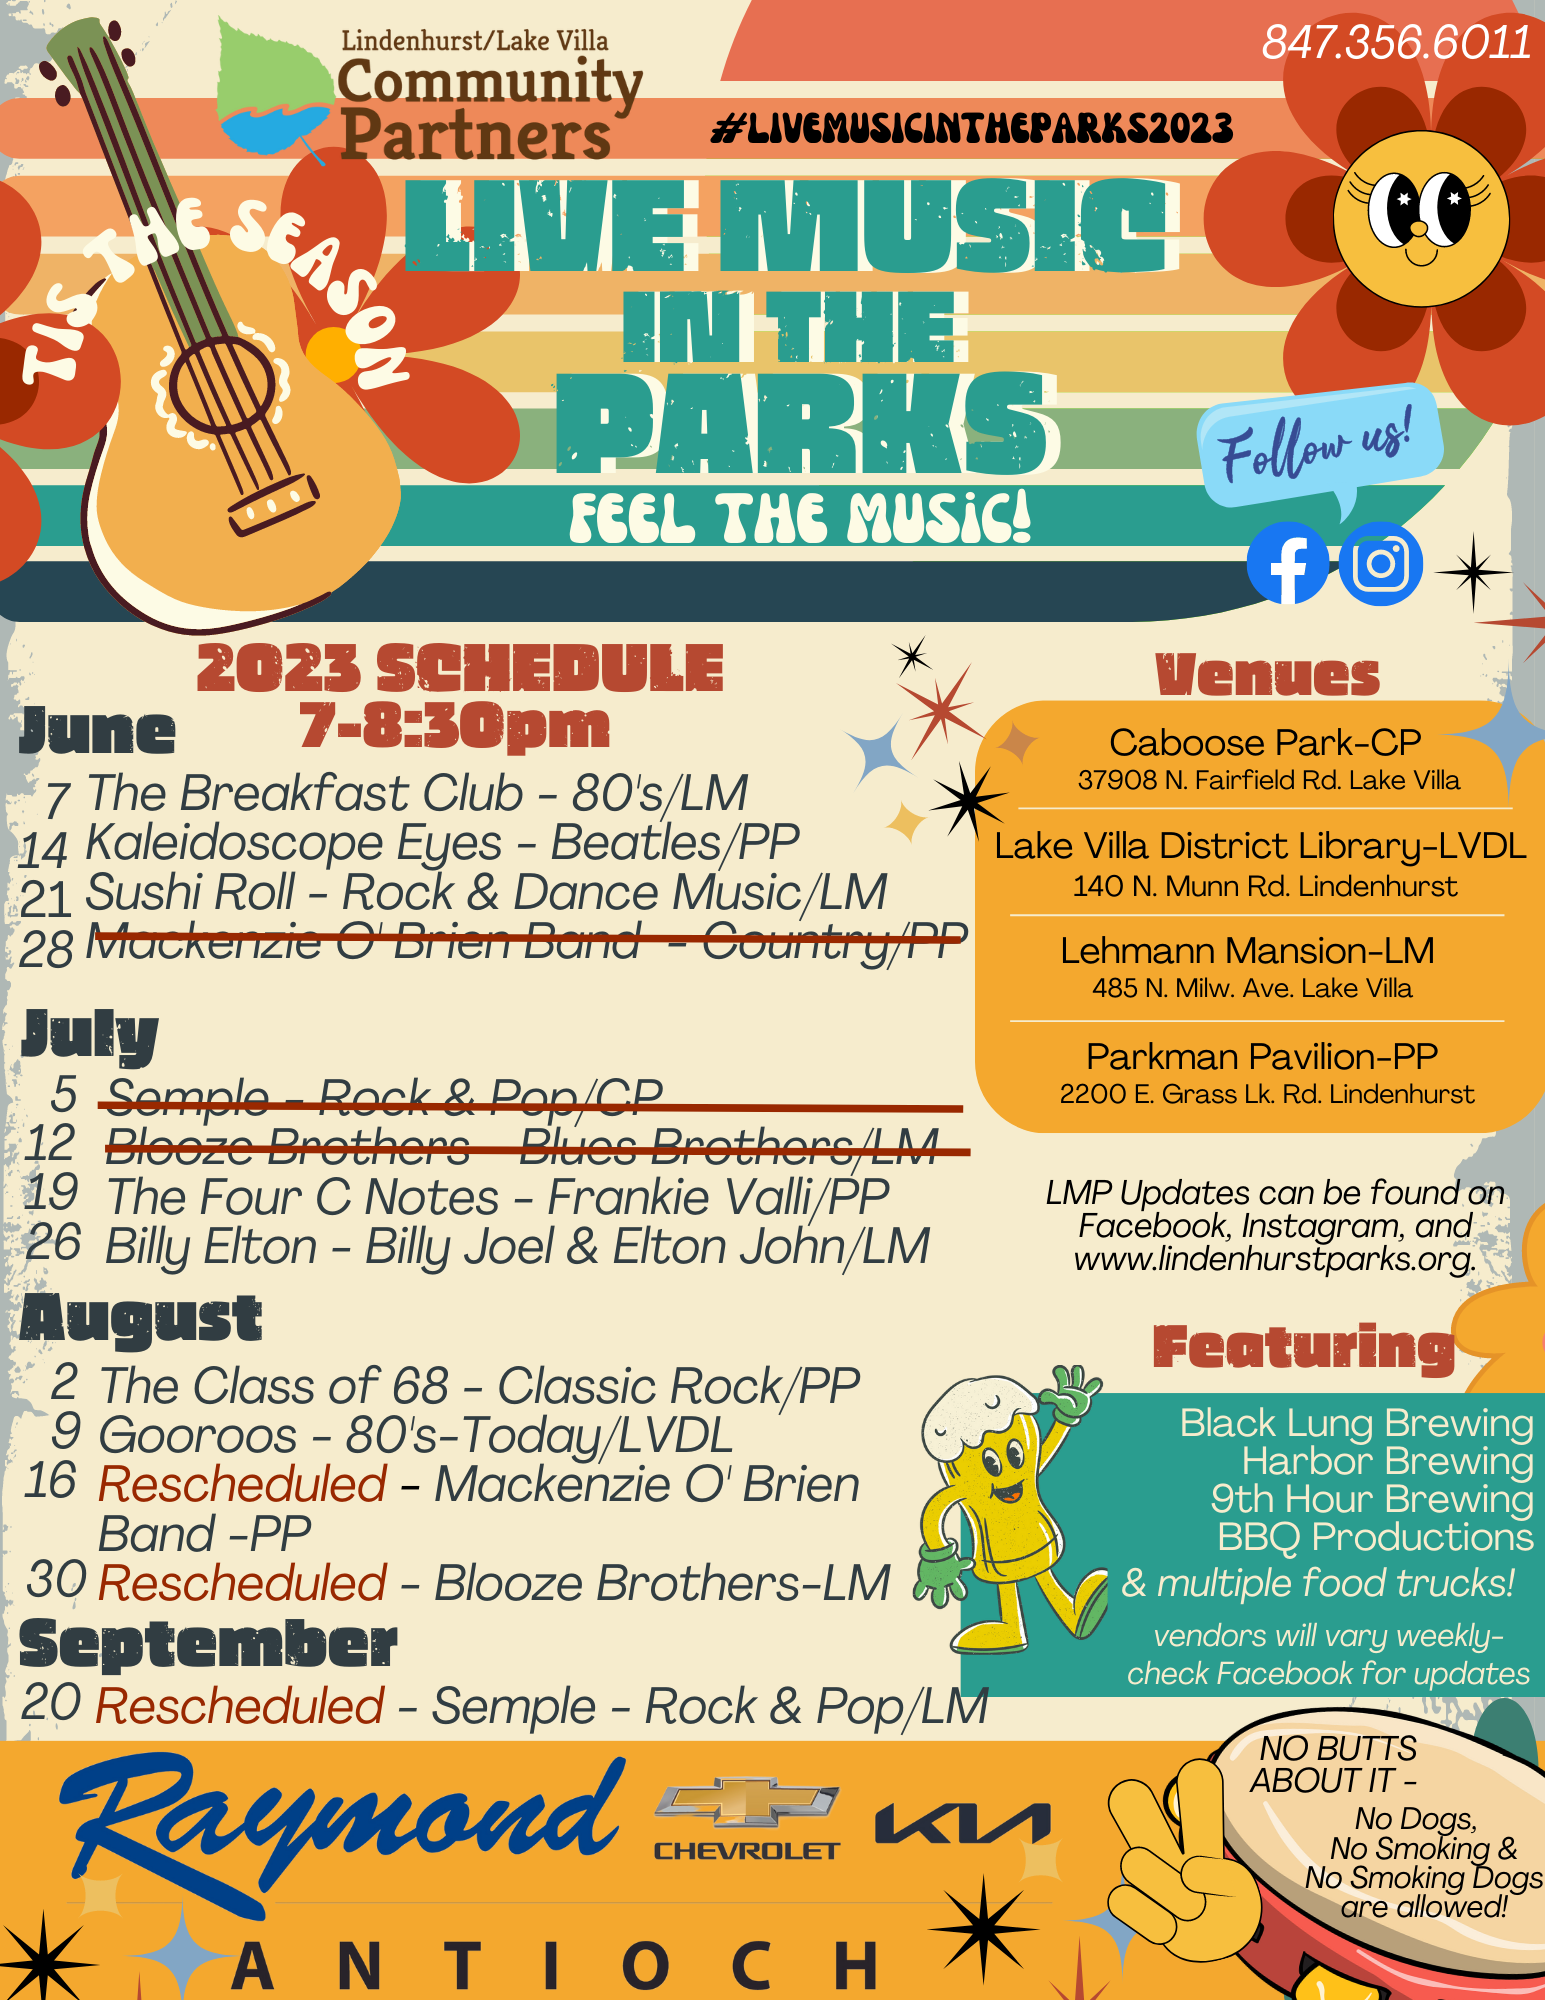 
A colorful flyer for the "LIVE MUSIC IN THE PARKS" series by Lindenhurst/Lake Villa Community Partners, featuring the 2023 schedule with bands and dates, spanning June to September. Venues listed include Caboose Park, Lake Villa District Library, Lehmann Mansion, and Parkman Pavilion. The event promotes a variety of music genres and also mentions local brewery sponsors, with instructions to follow for updates on social media. The flyer highlights the no-smoking policy and contains contact details, encouraging the audience to "Feel the Music!